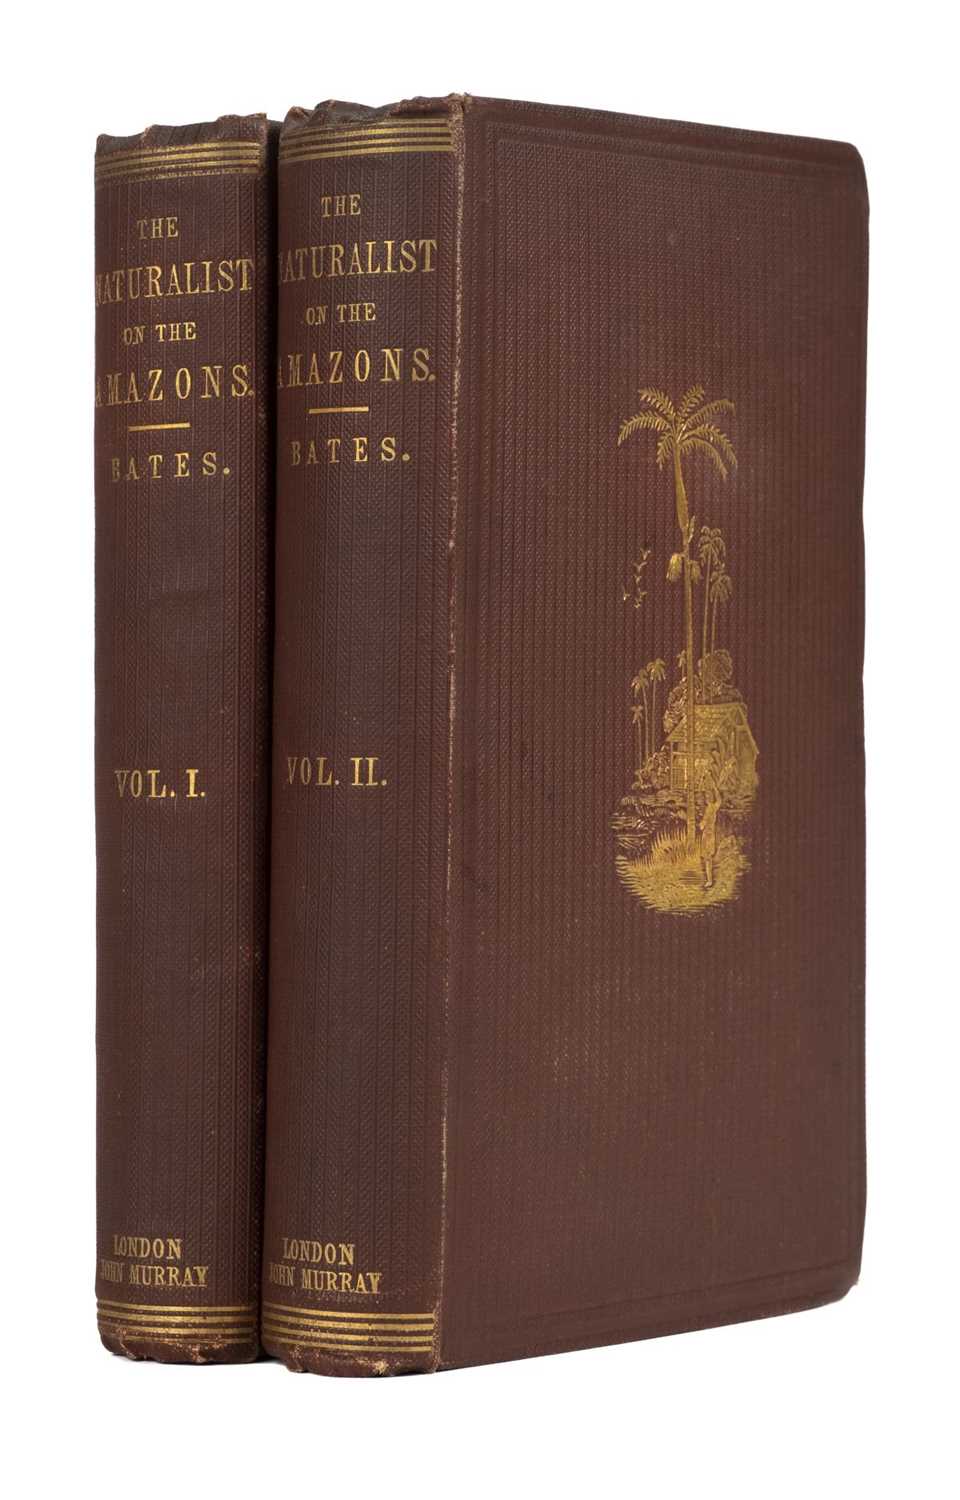 Lot 223 - Bates (Henry Walter). The Naturalist on the River Amazons, 1st edition, 1863